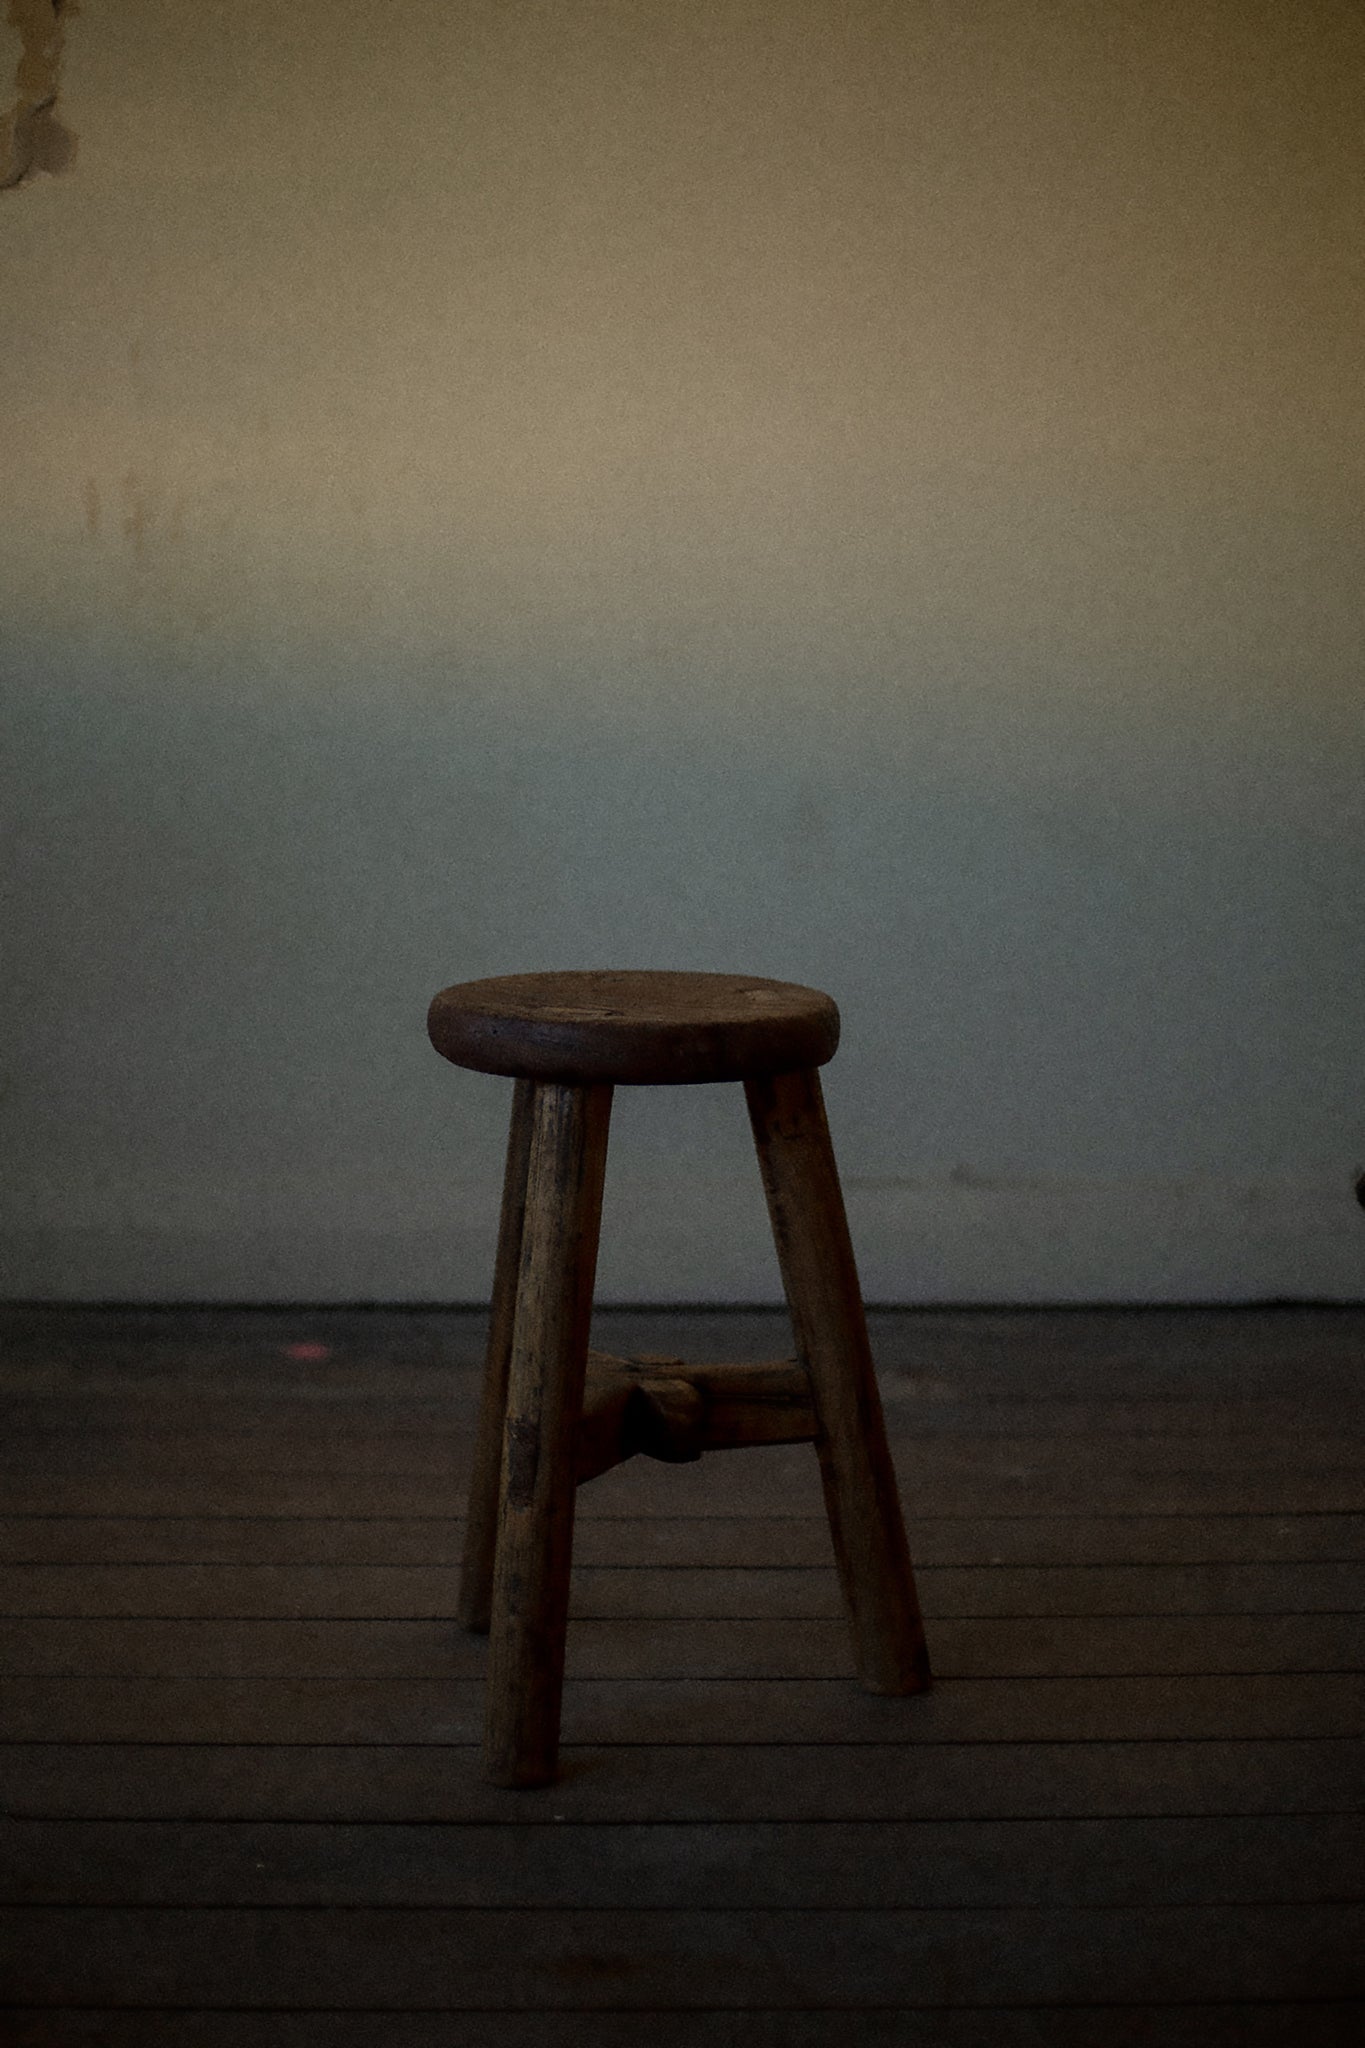 A little wooden circular stool on hard wood floor, the light is gloomy as day comes to a close.